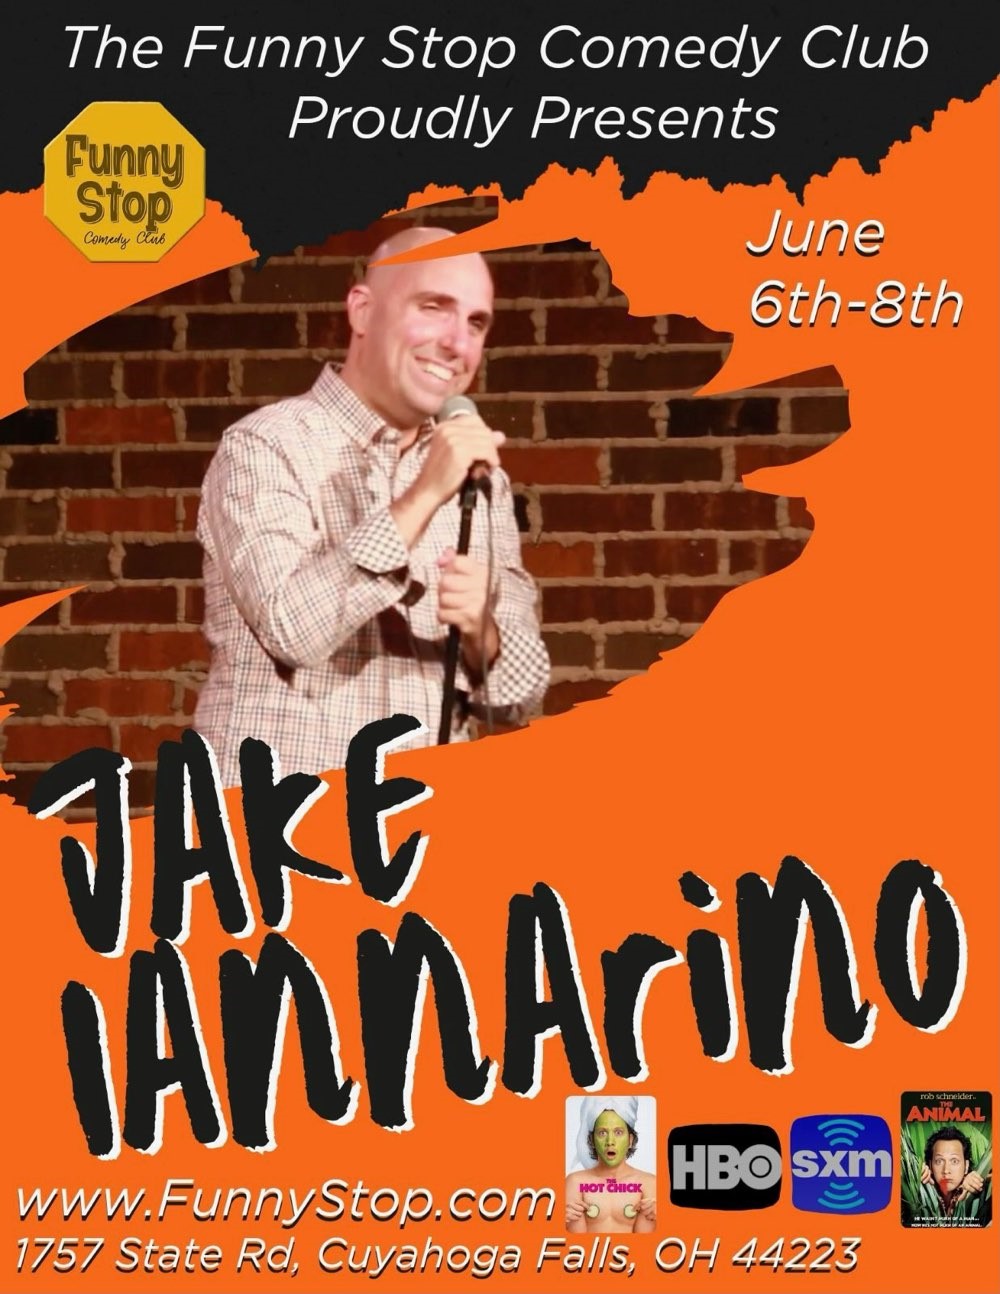 Jake Iannarino - Fri. 9:30PM Show Funny Stop Comedy Club on Jun 07, 21:30@Funny Stop Comedy Club - Buy tickets and Get information on Funny Stop funnystop.online